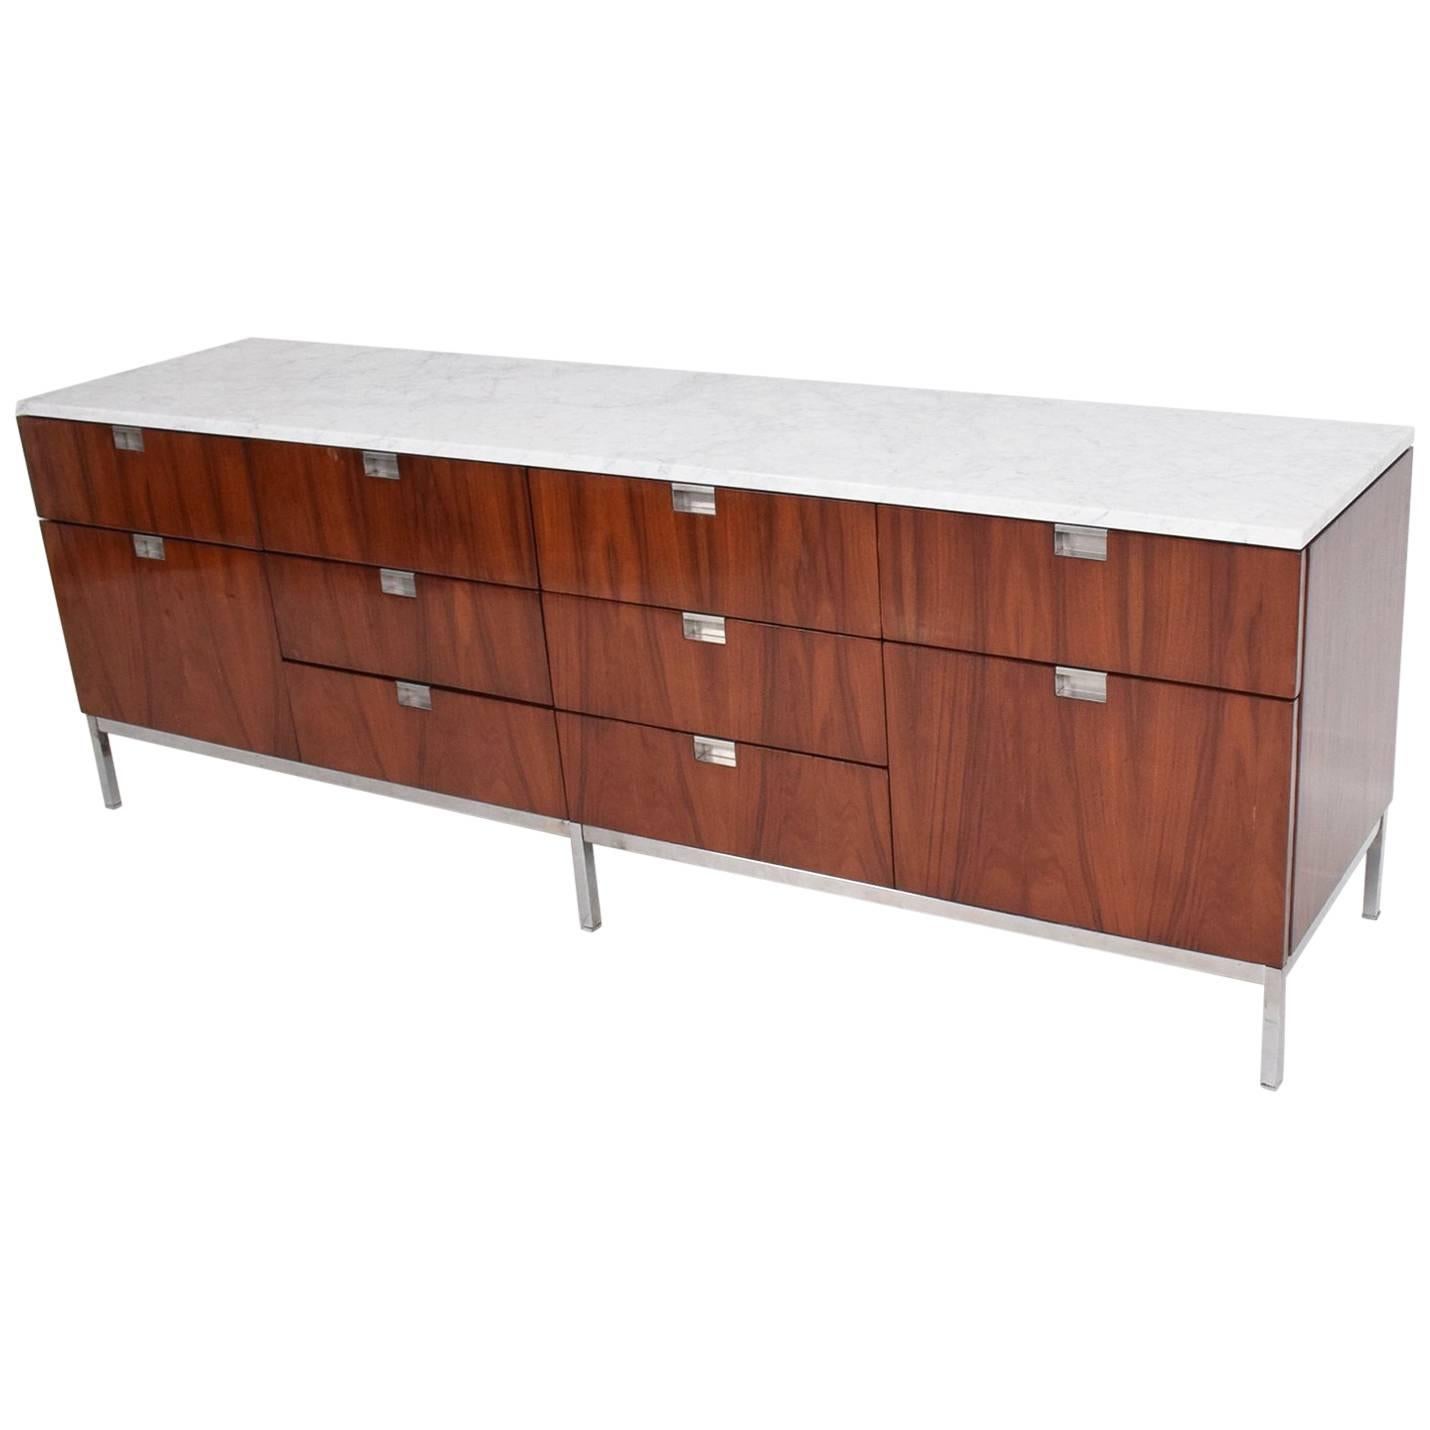 For your consideration a beautiful rosewood credenza designed by Florence Knoll with marble top.

Features (8) eight small pull out drawers and (2) two large file drawers. 
Chrome base has some vintage pitting/patina. 
All drawers open and close